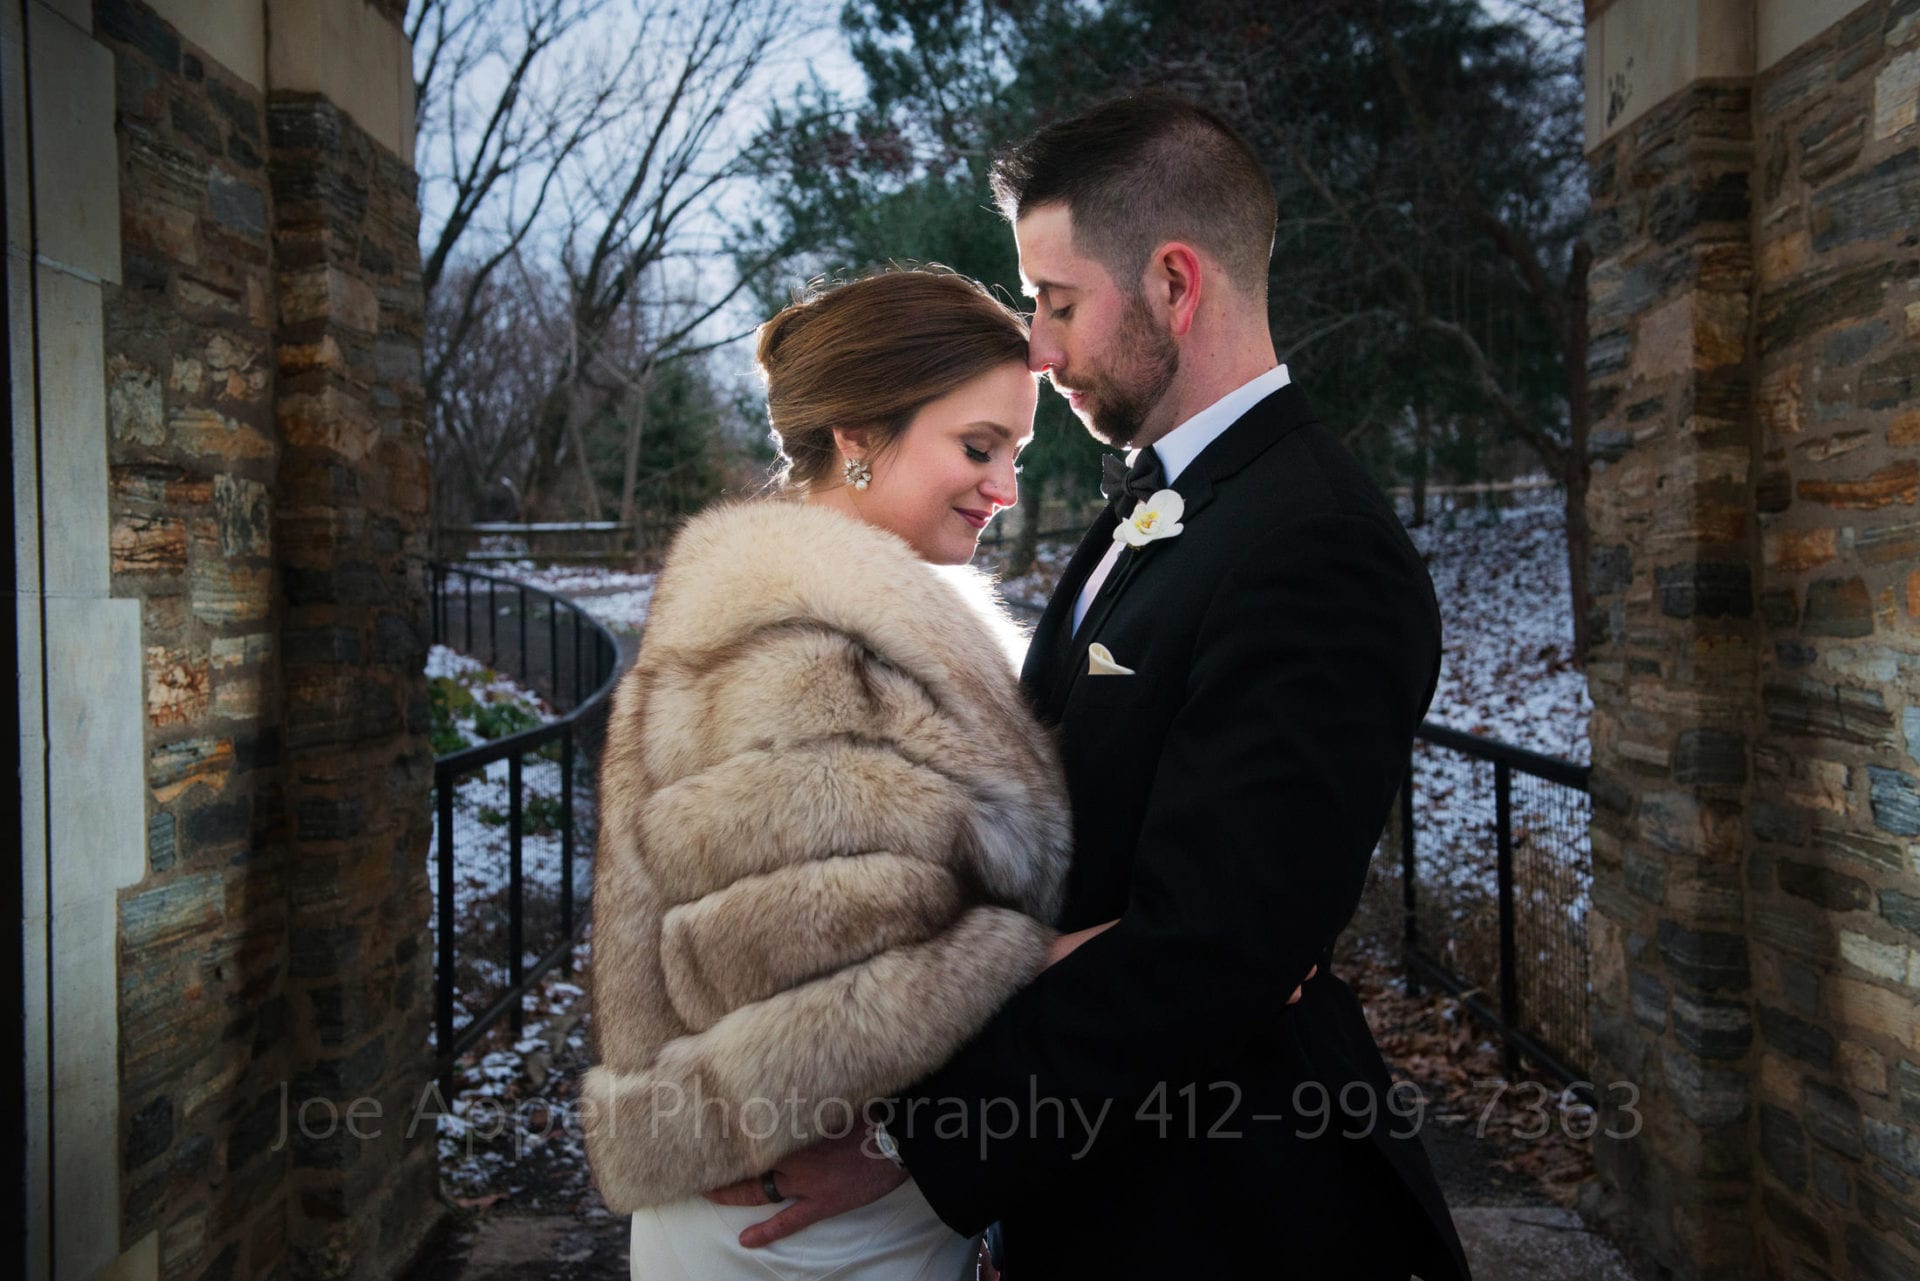 A beautiful rimlight surrounds a couple as they embrace in the twilight.